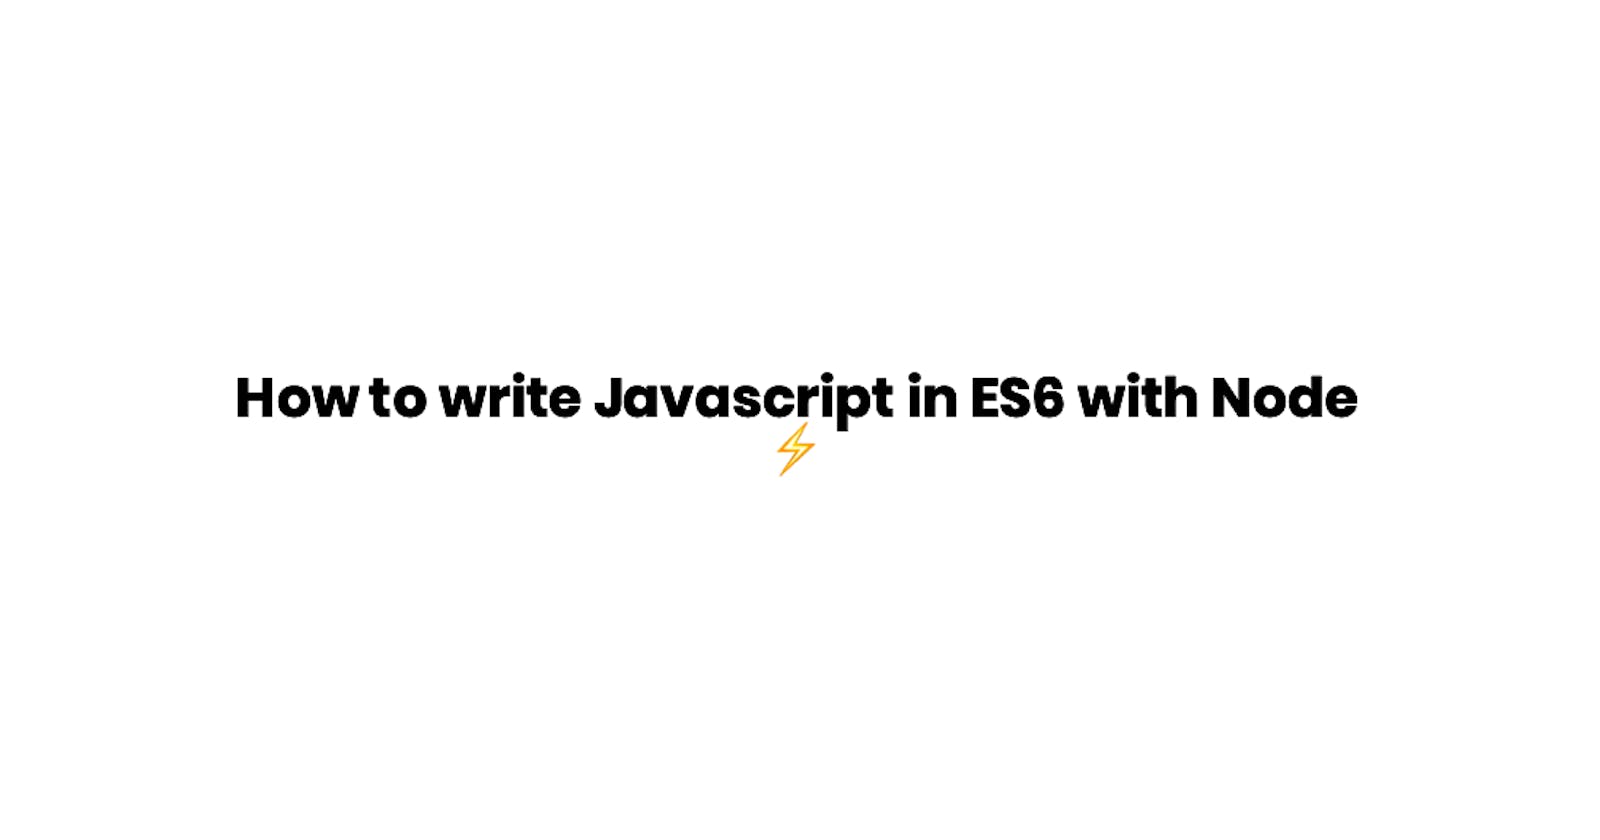 How to write Javascript in ES6 with Nodejs